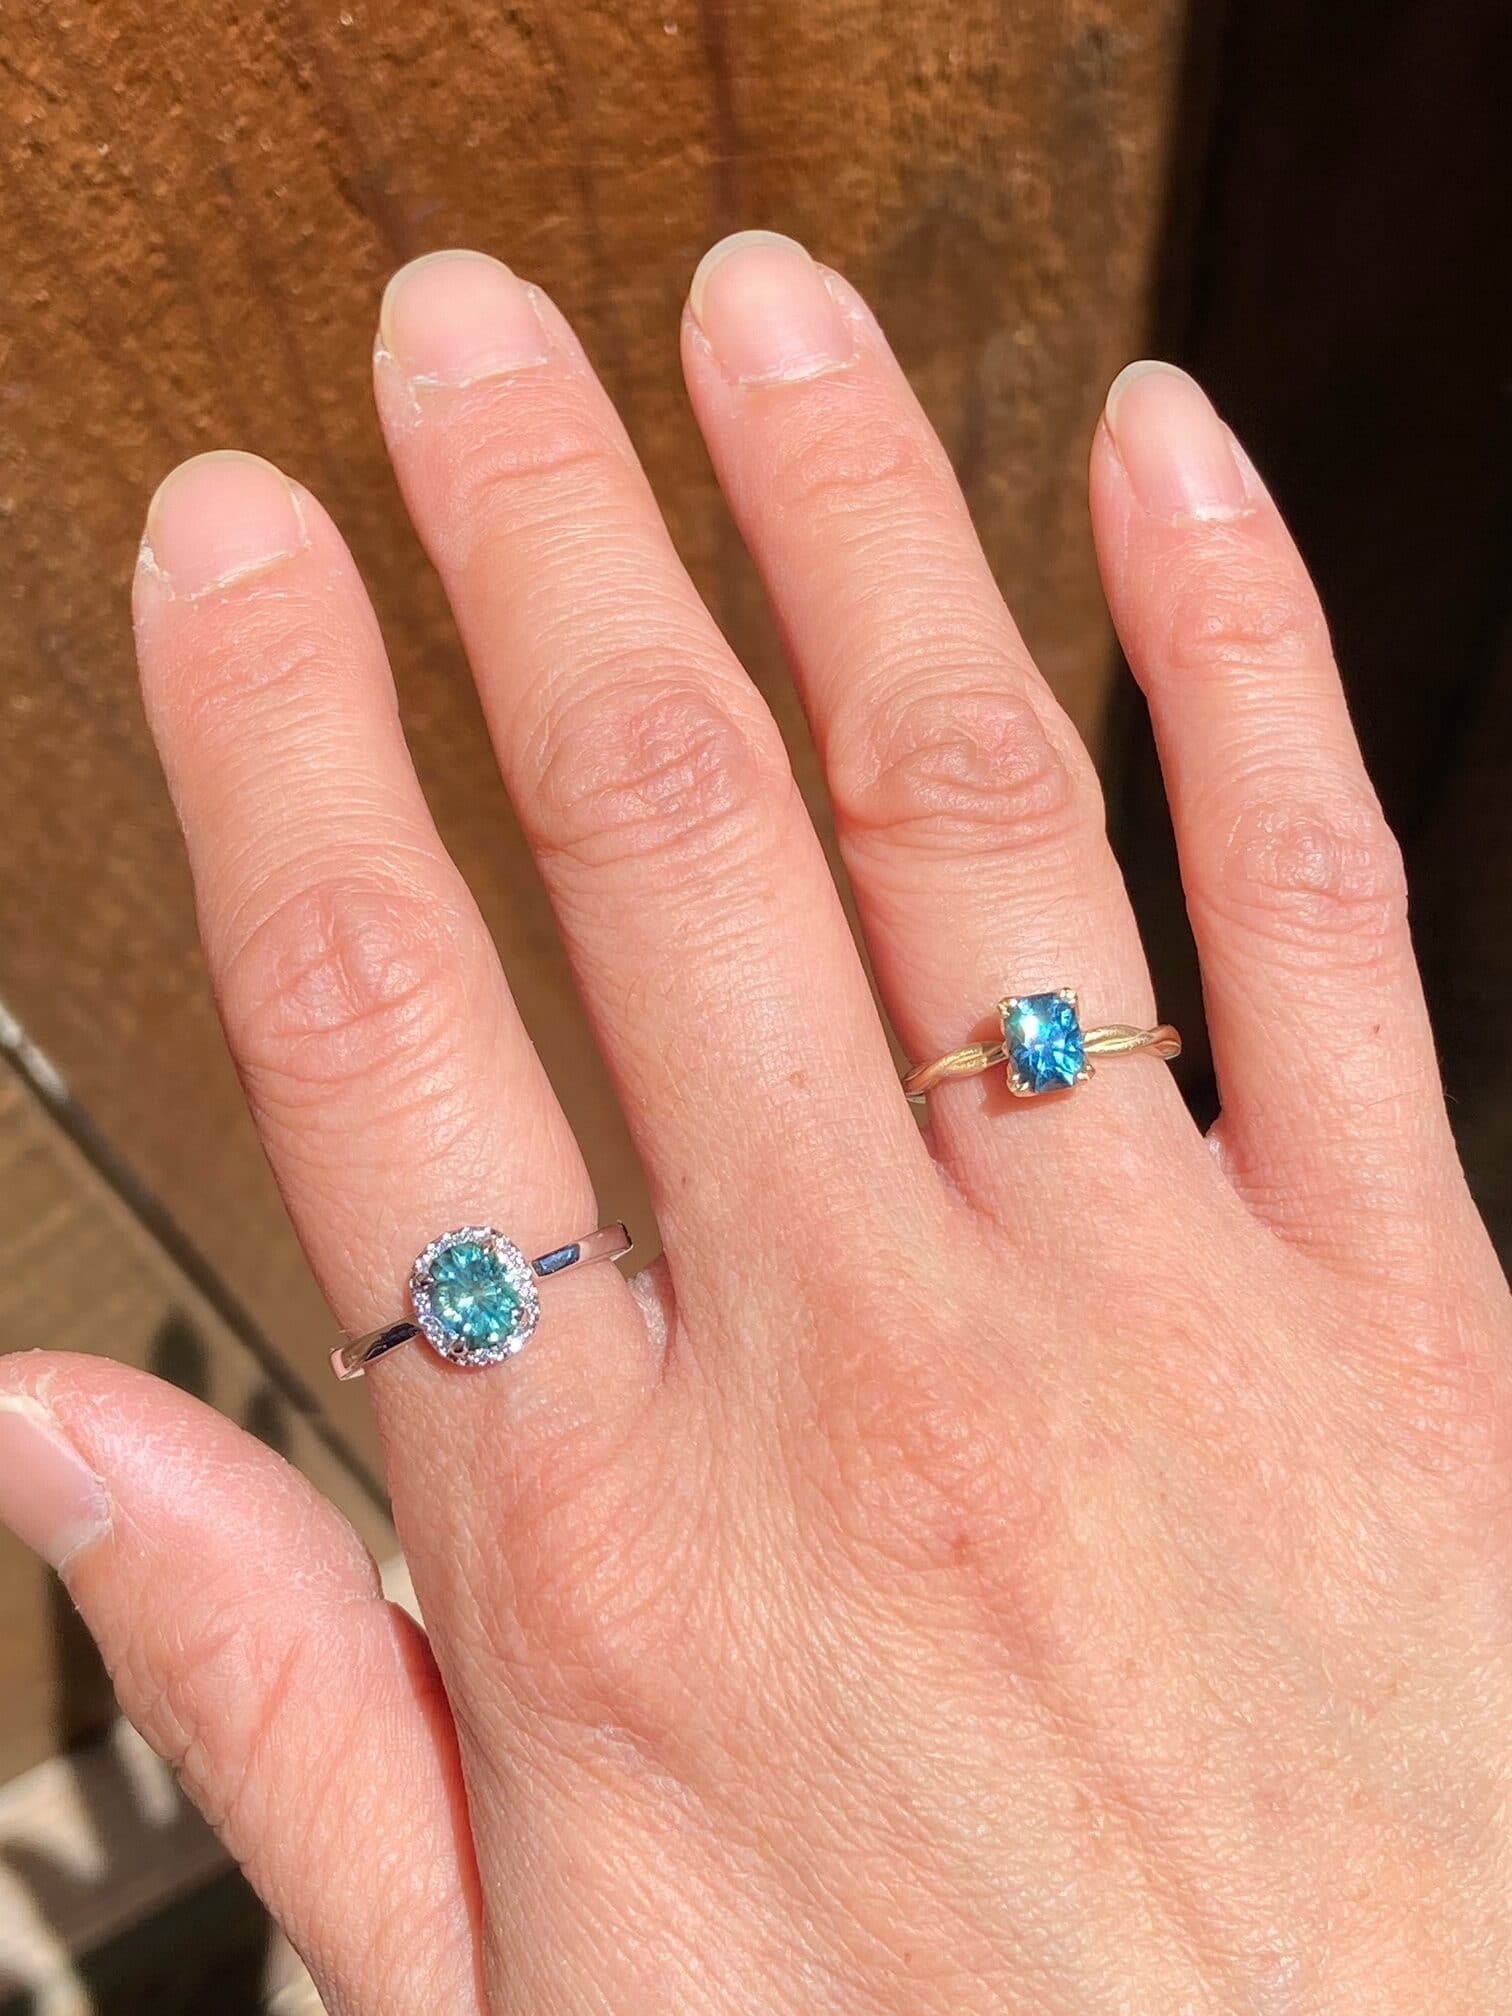 A photo from a customer review featuring two rings. On the left, an "Alice" ring in 14k white gold with 0.96-Carat Montana Sapphire. On the right, a ring not made by Earth's Treasury with a 0.88-Carat Montana Sapphire.